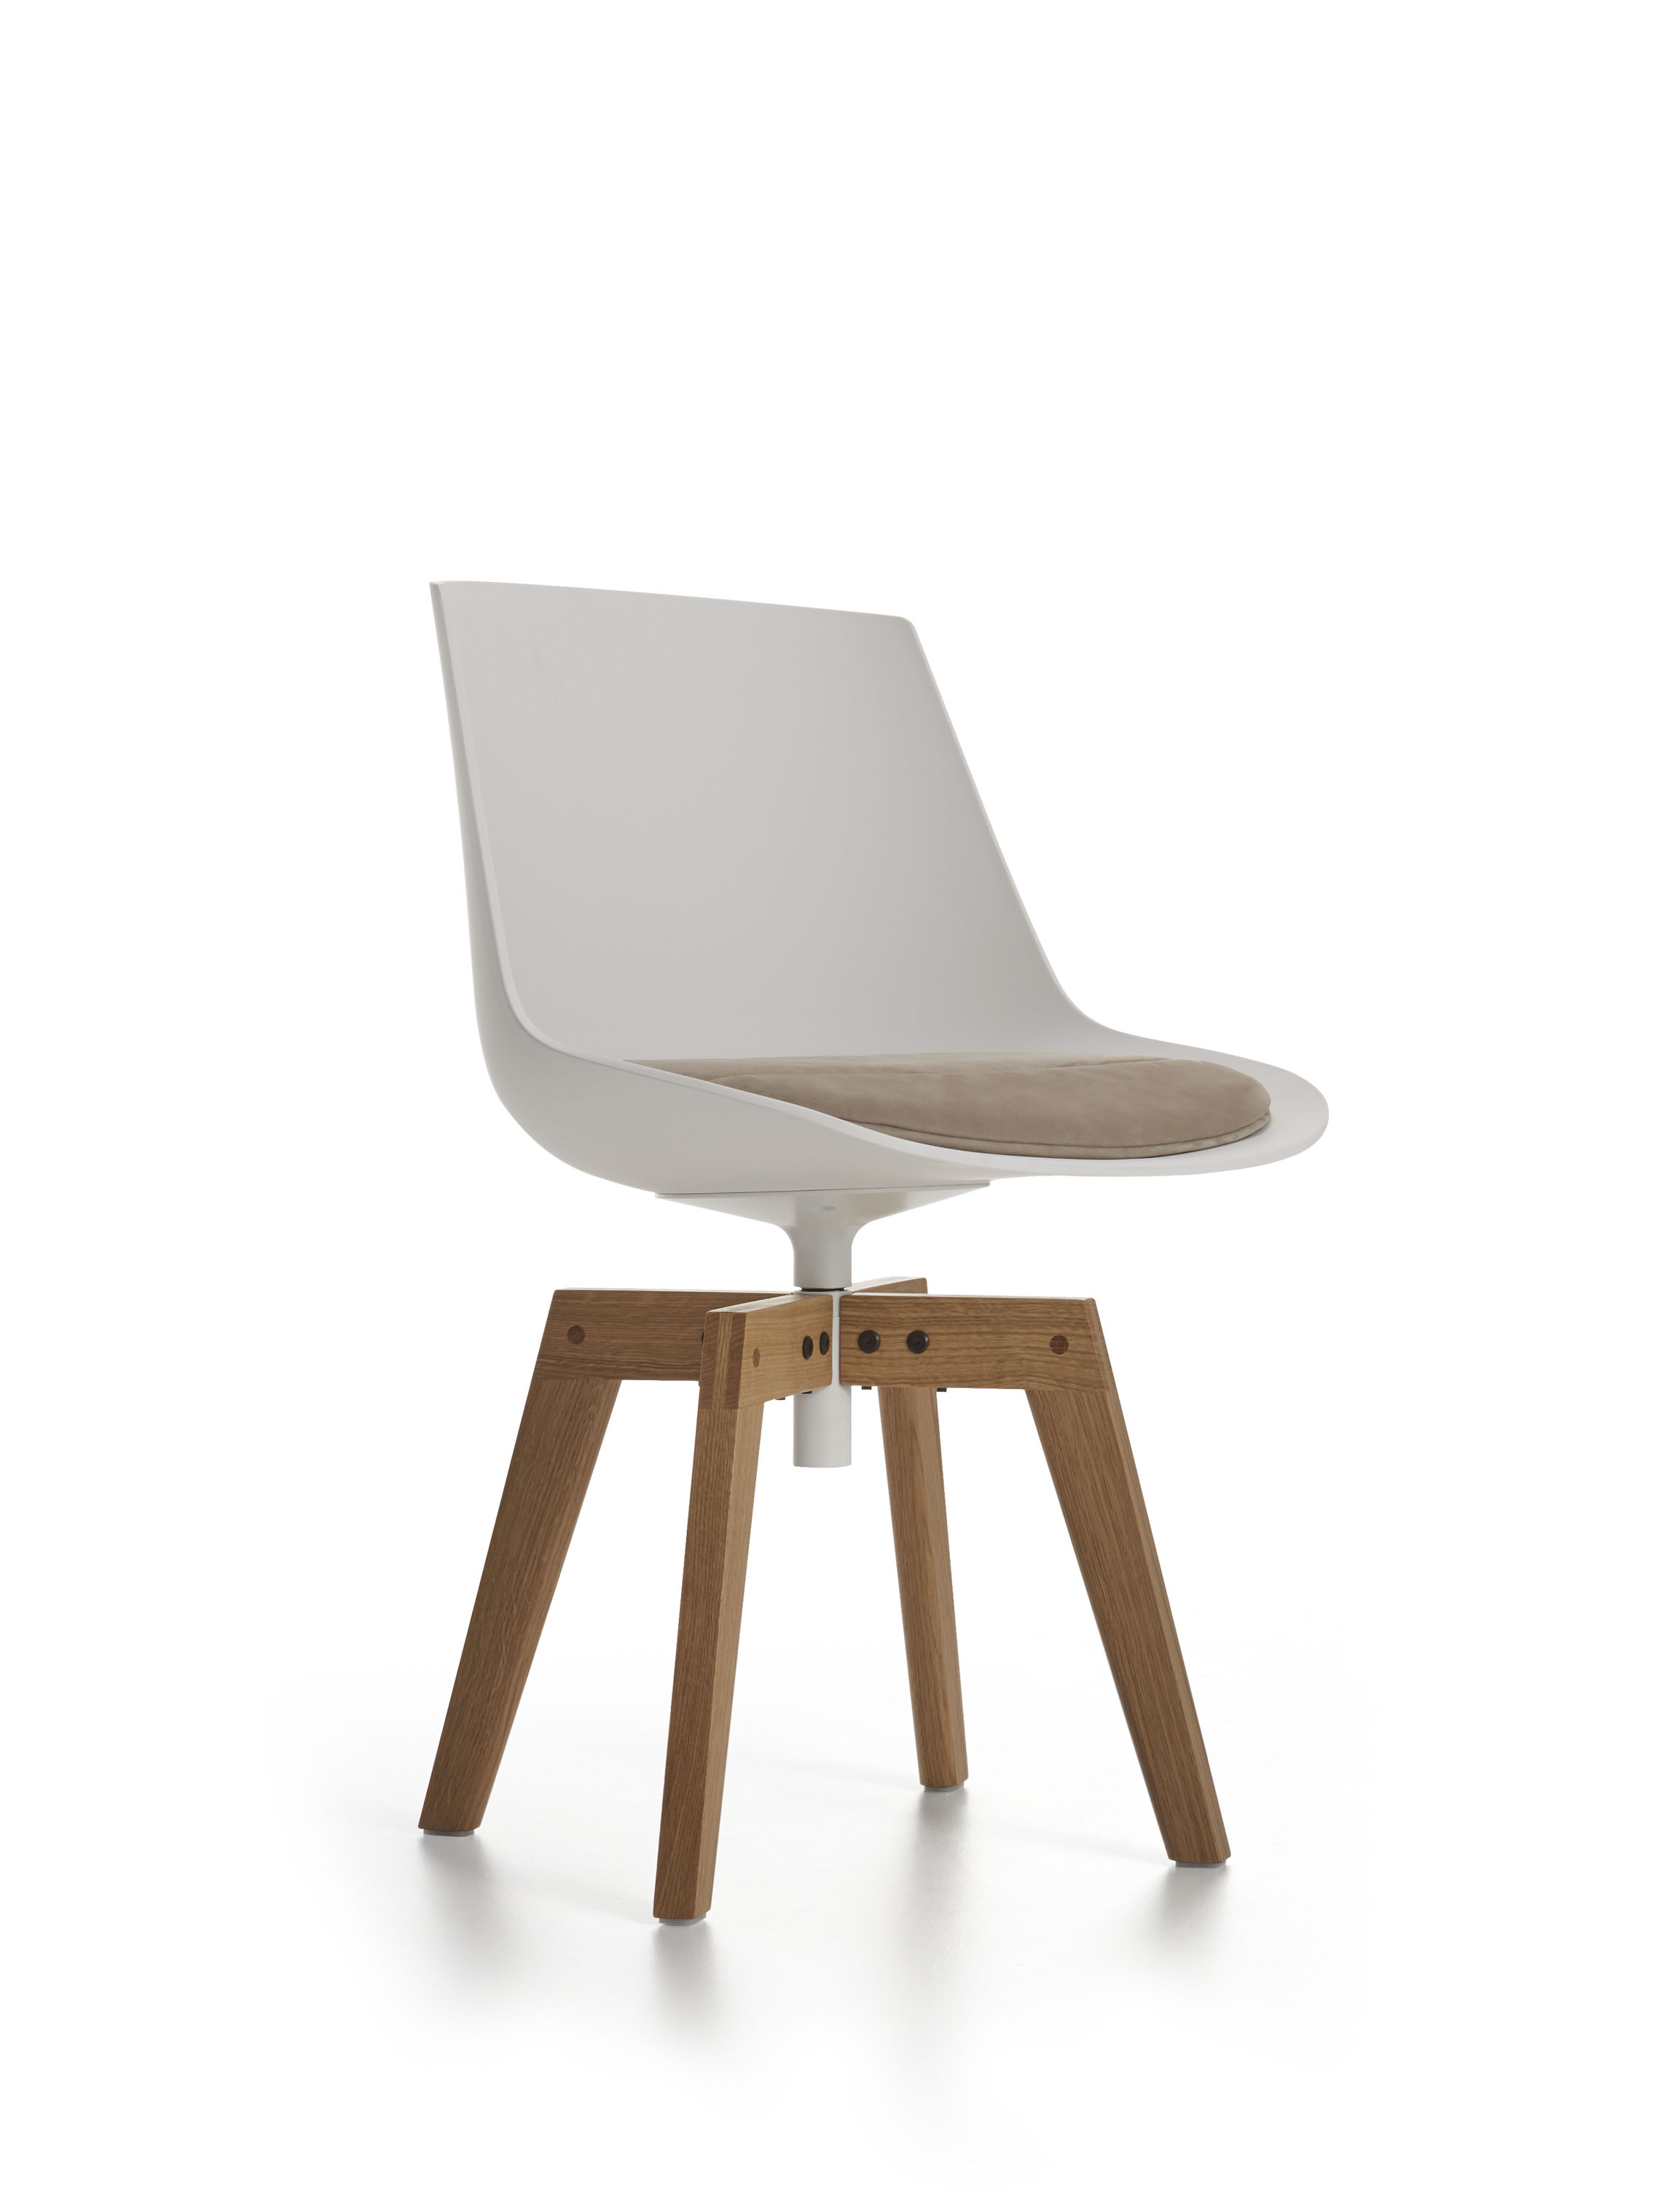 wacht aanpassen een vuurtje stoken FLOW CHAIR. Chairs with a modern design for home and office. MDF Italia.